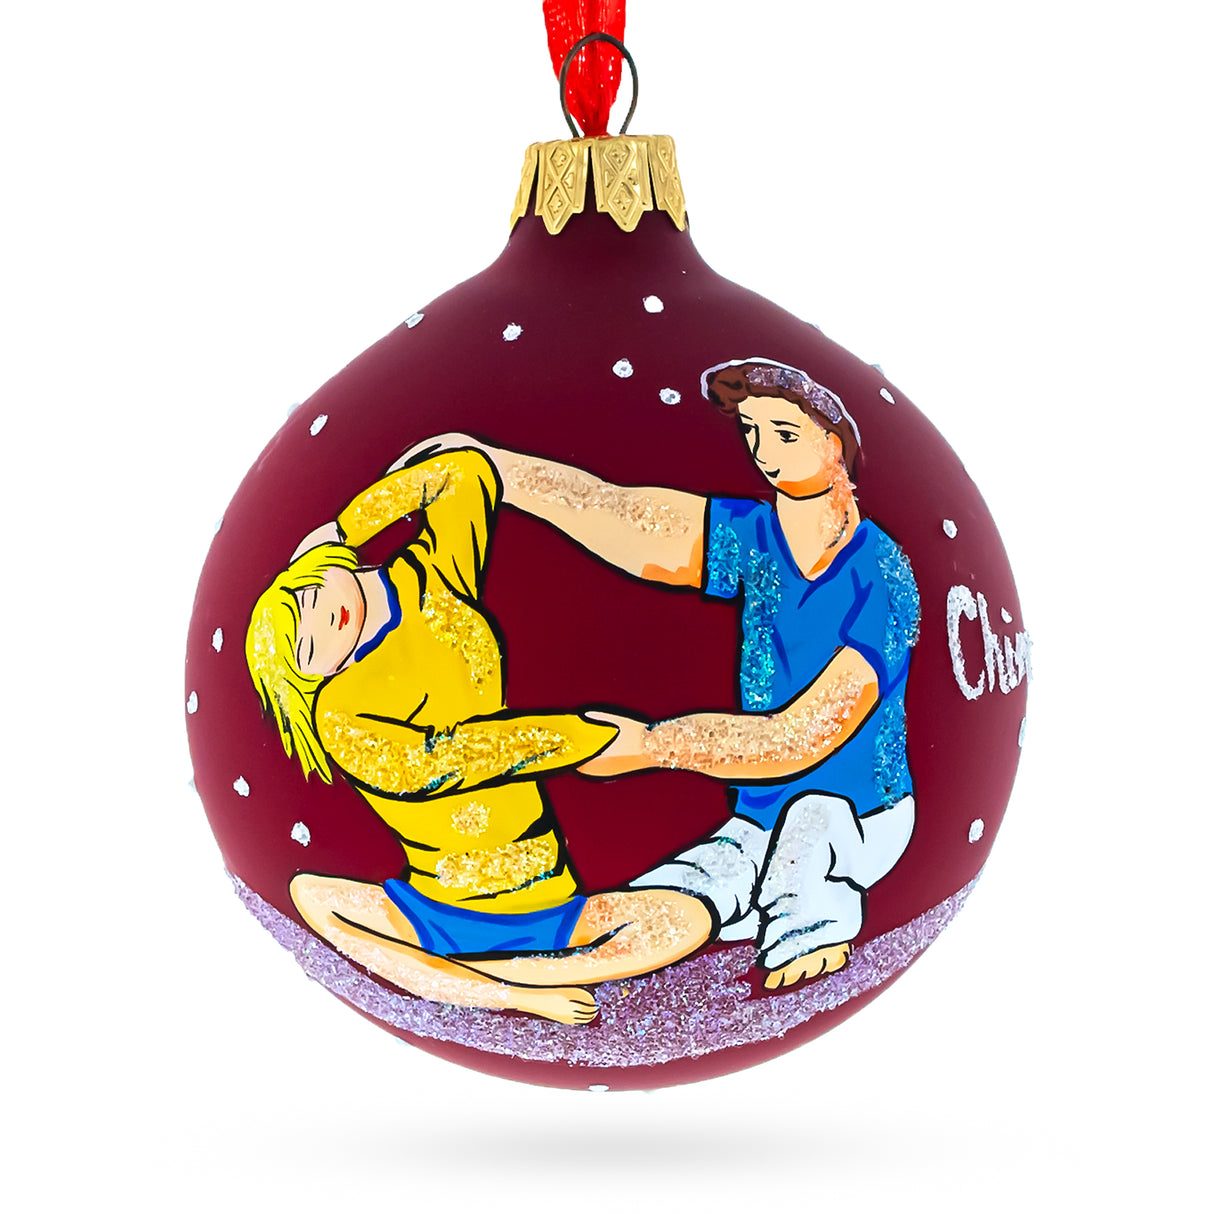 Spinal Care Specialist: Chiropractor Blown Glass Ball Christmas Ornament 3.25 Inches in Red color, Round shape